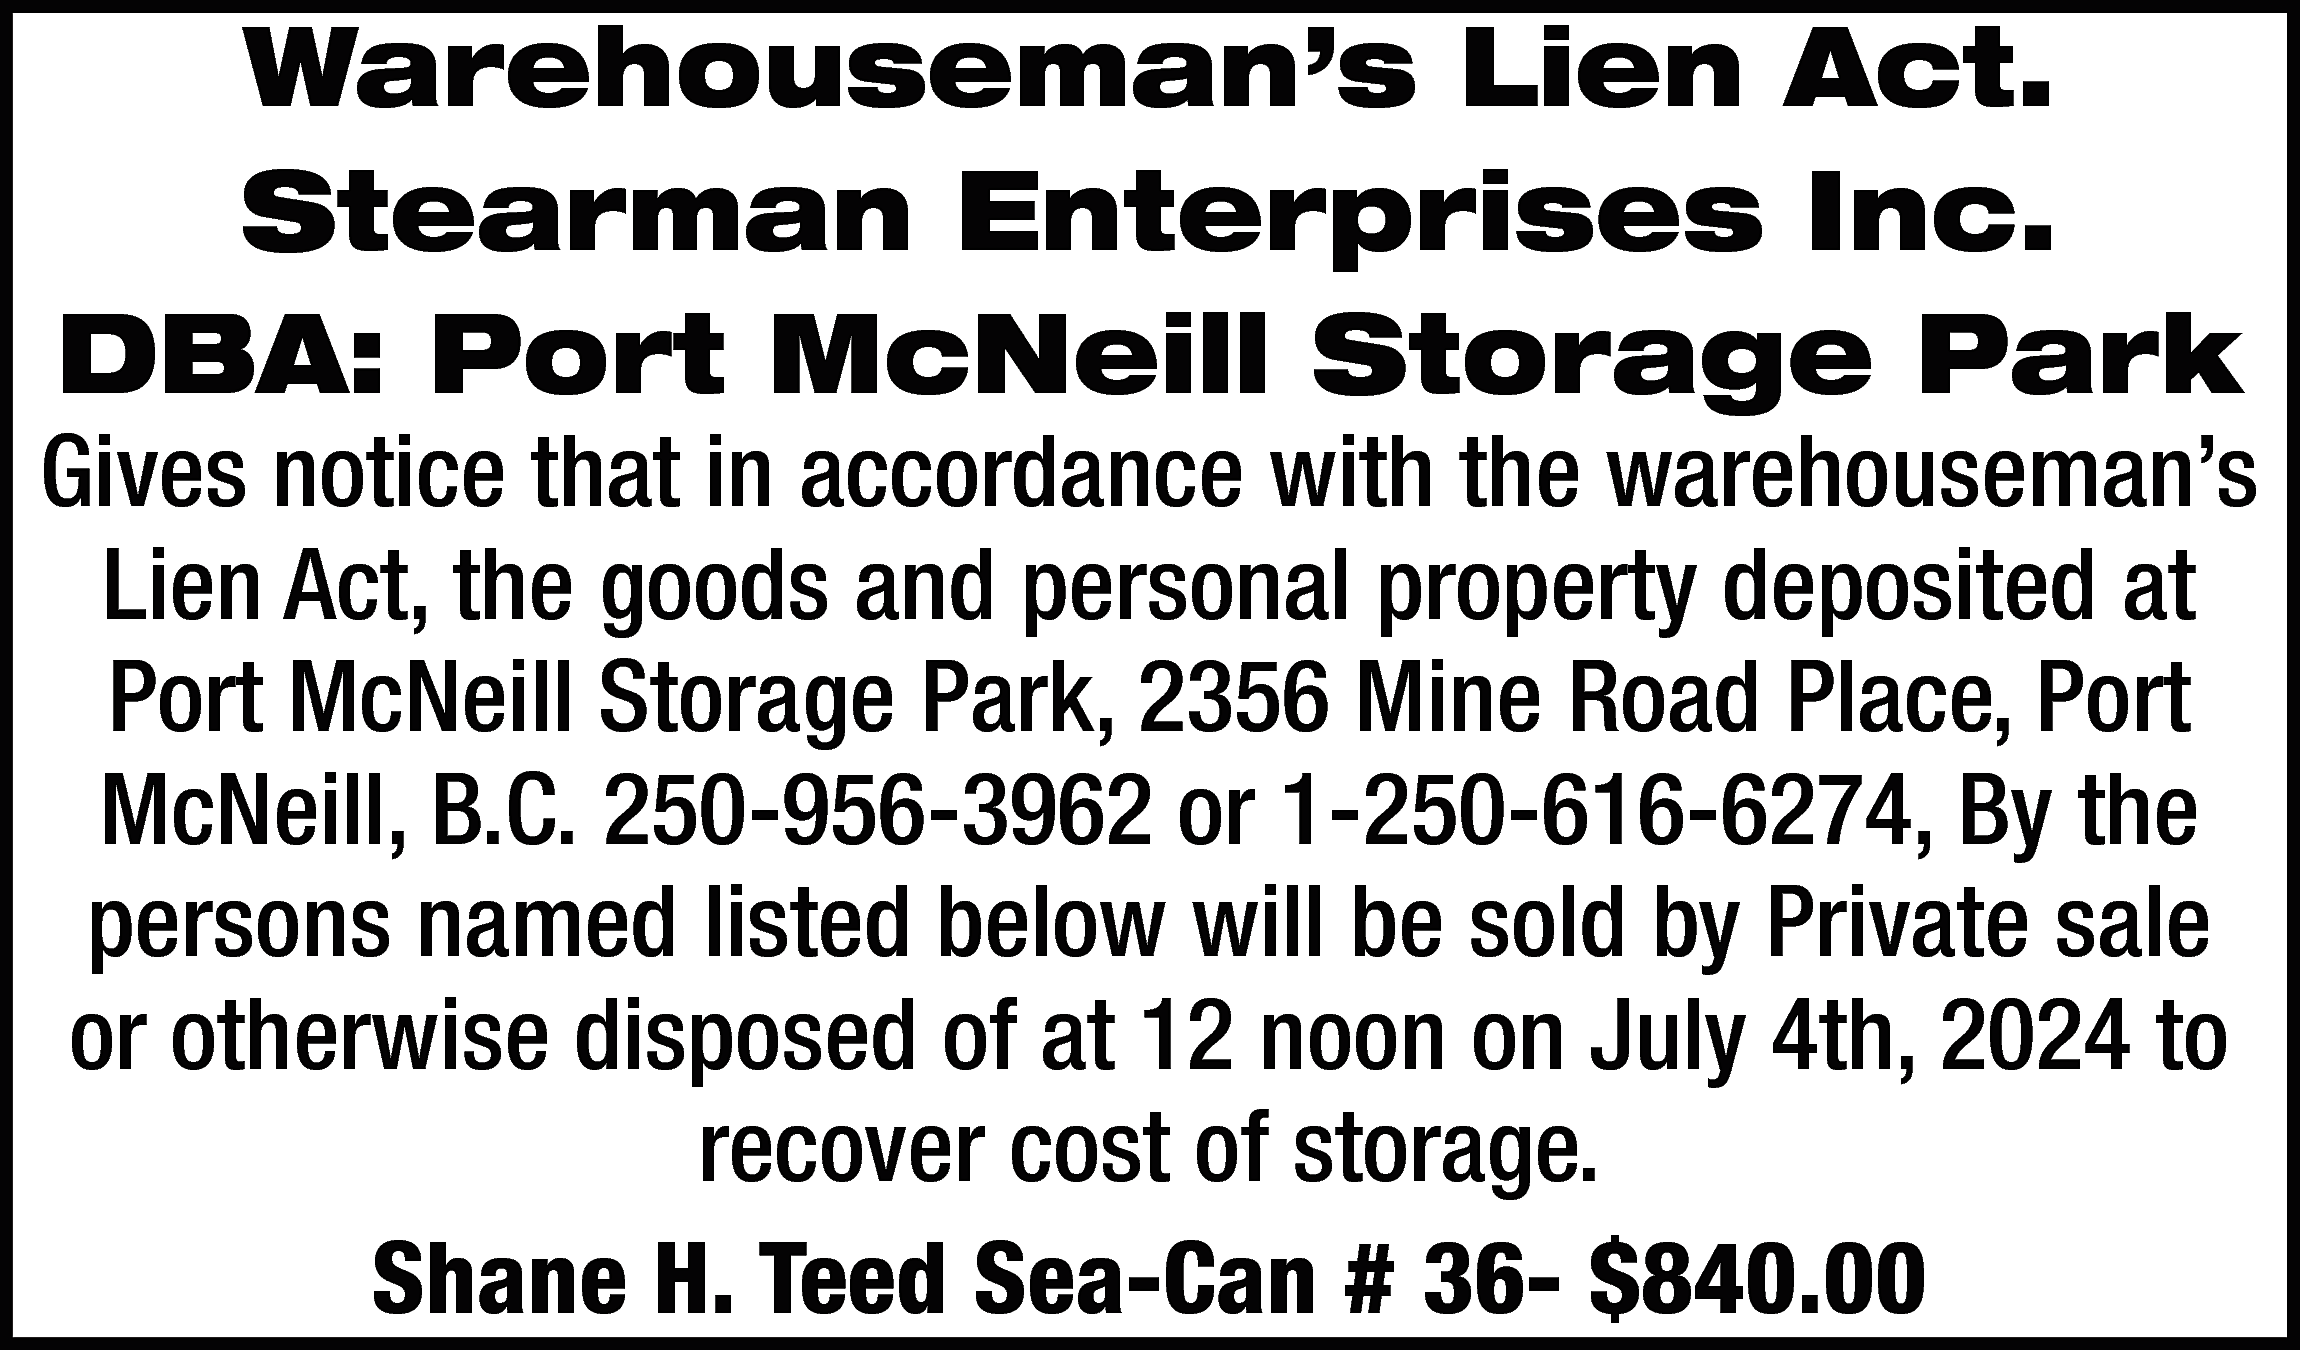 Warehouseman’s Lien Act. <br>Stearman Enterprises  Warehouseman’s Lien Act.  Stearman Enterprises Inc.  DBA: Port McNeill Storage Park    Gives notice that in accordance with the warehouseman’s  Lien Act, the goods and personal property deposited at  Port McNeill Storage Park, 2356 Mine Road Place, Port  McNeill, B.C. 250-956-3962 or 1-250-616-6274, By the  persons named listed below will be sold by Private sale  or otherwise disposed of at 12 noon on July 4th, 2024 to  recover cost of storage.  Shane H. Teed Sea-Can # 36- $840.00    